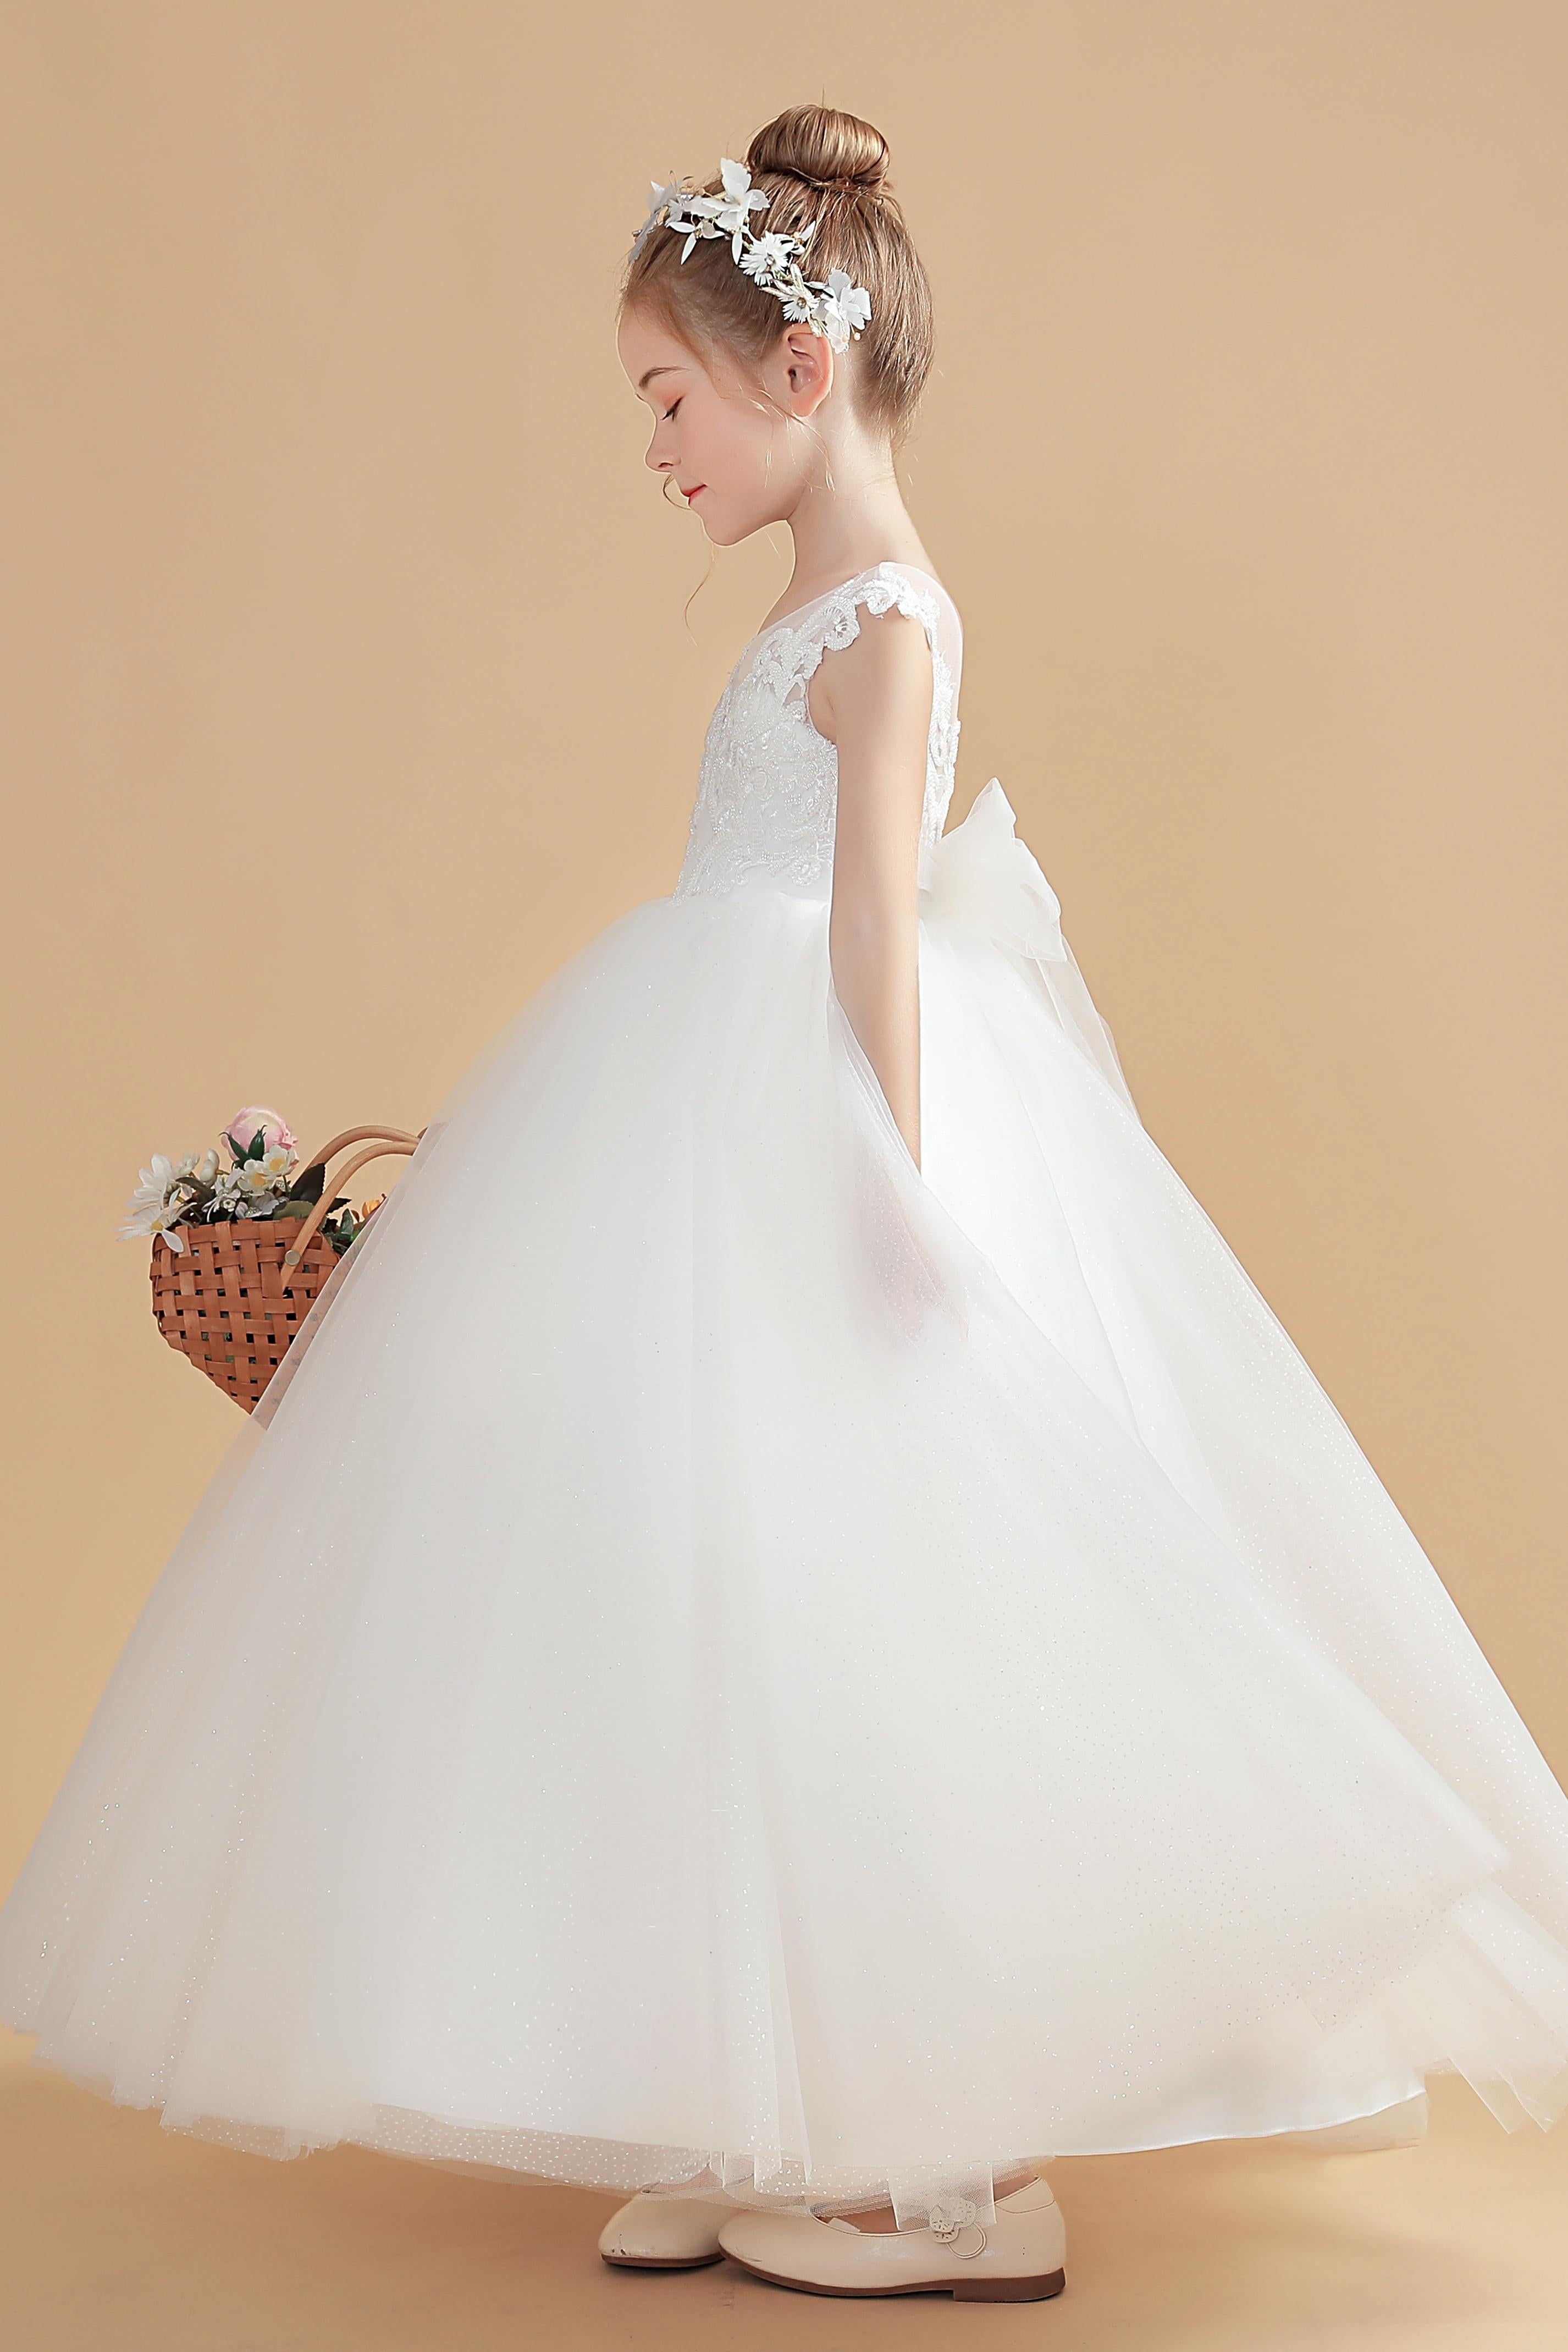 Ivory Tulle Cap Sleeves Flower Girl Dresses With Bow-Knot